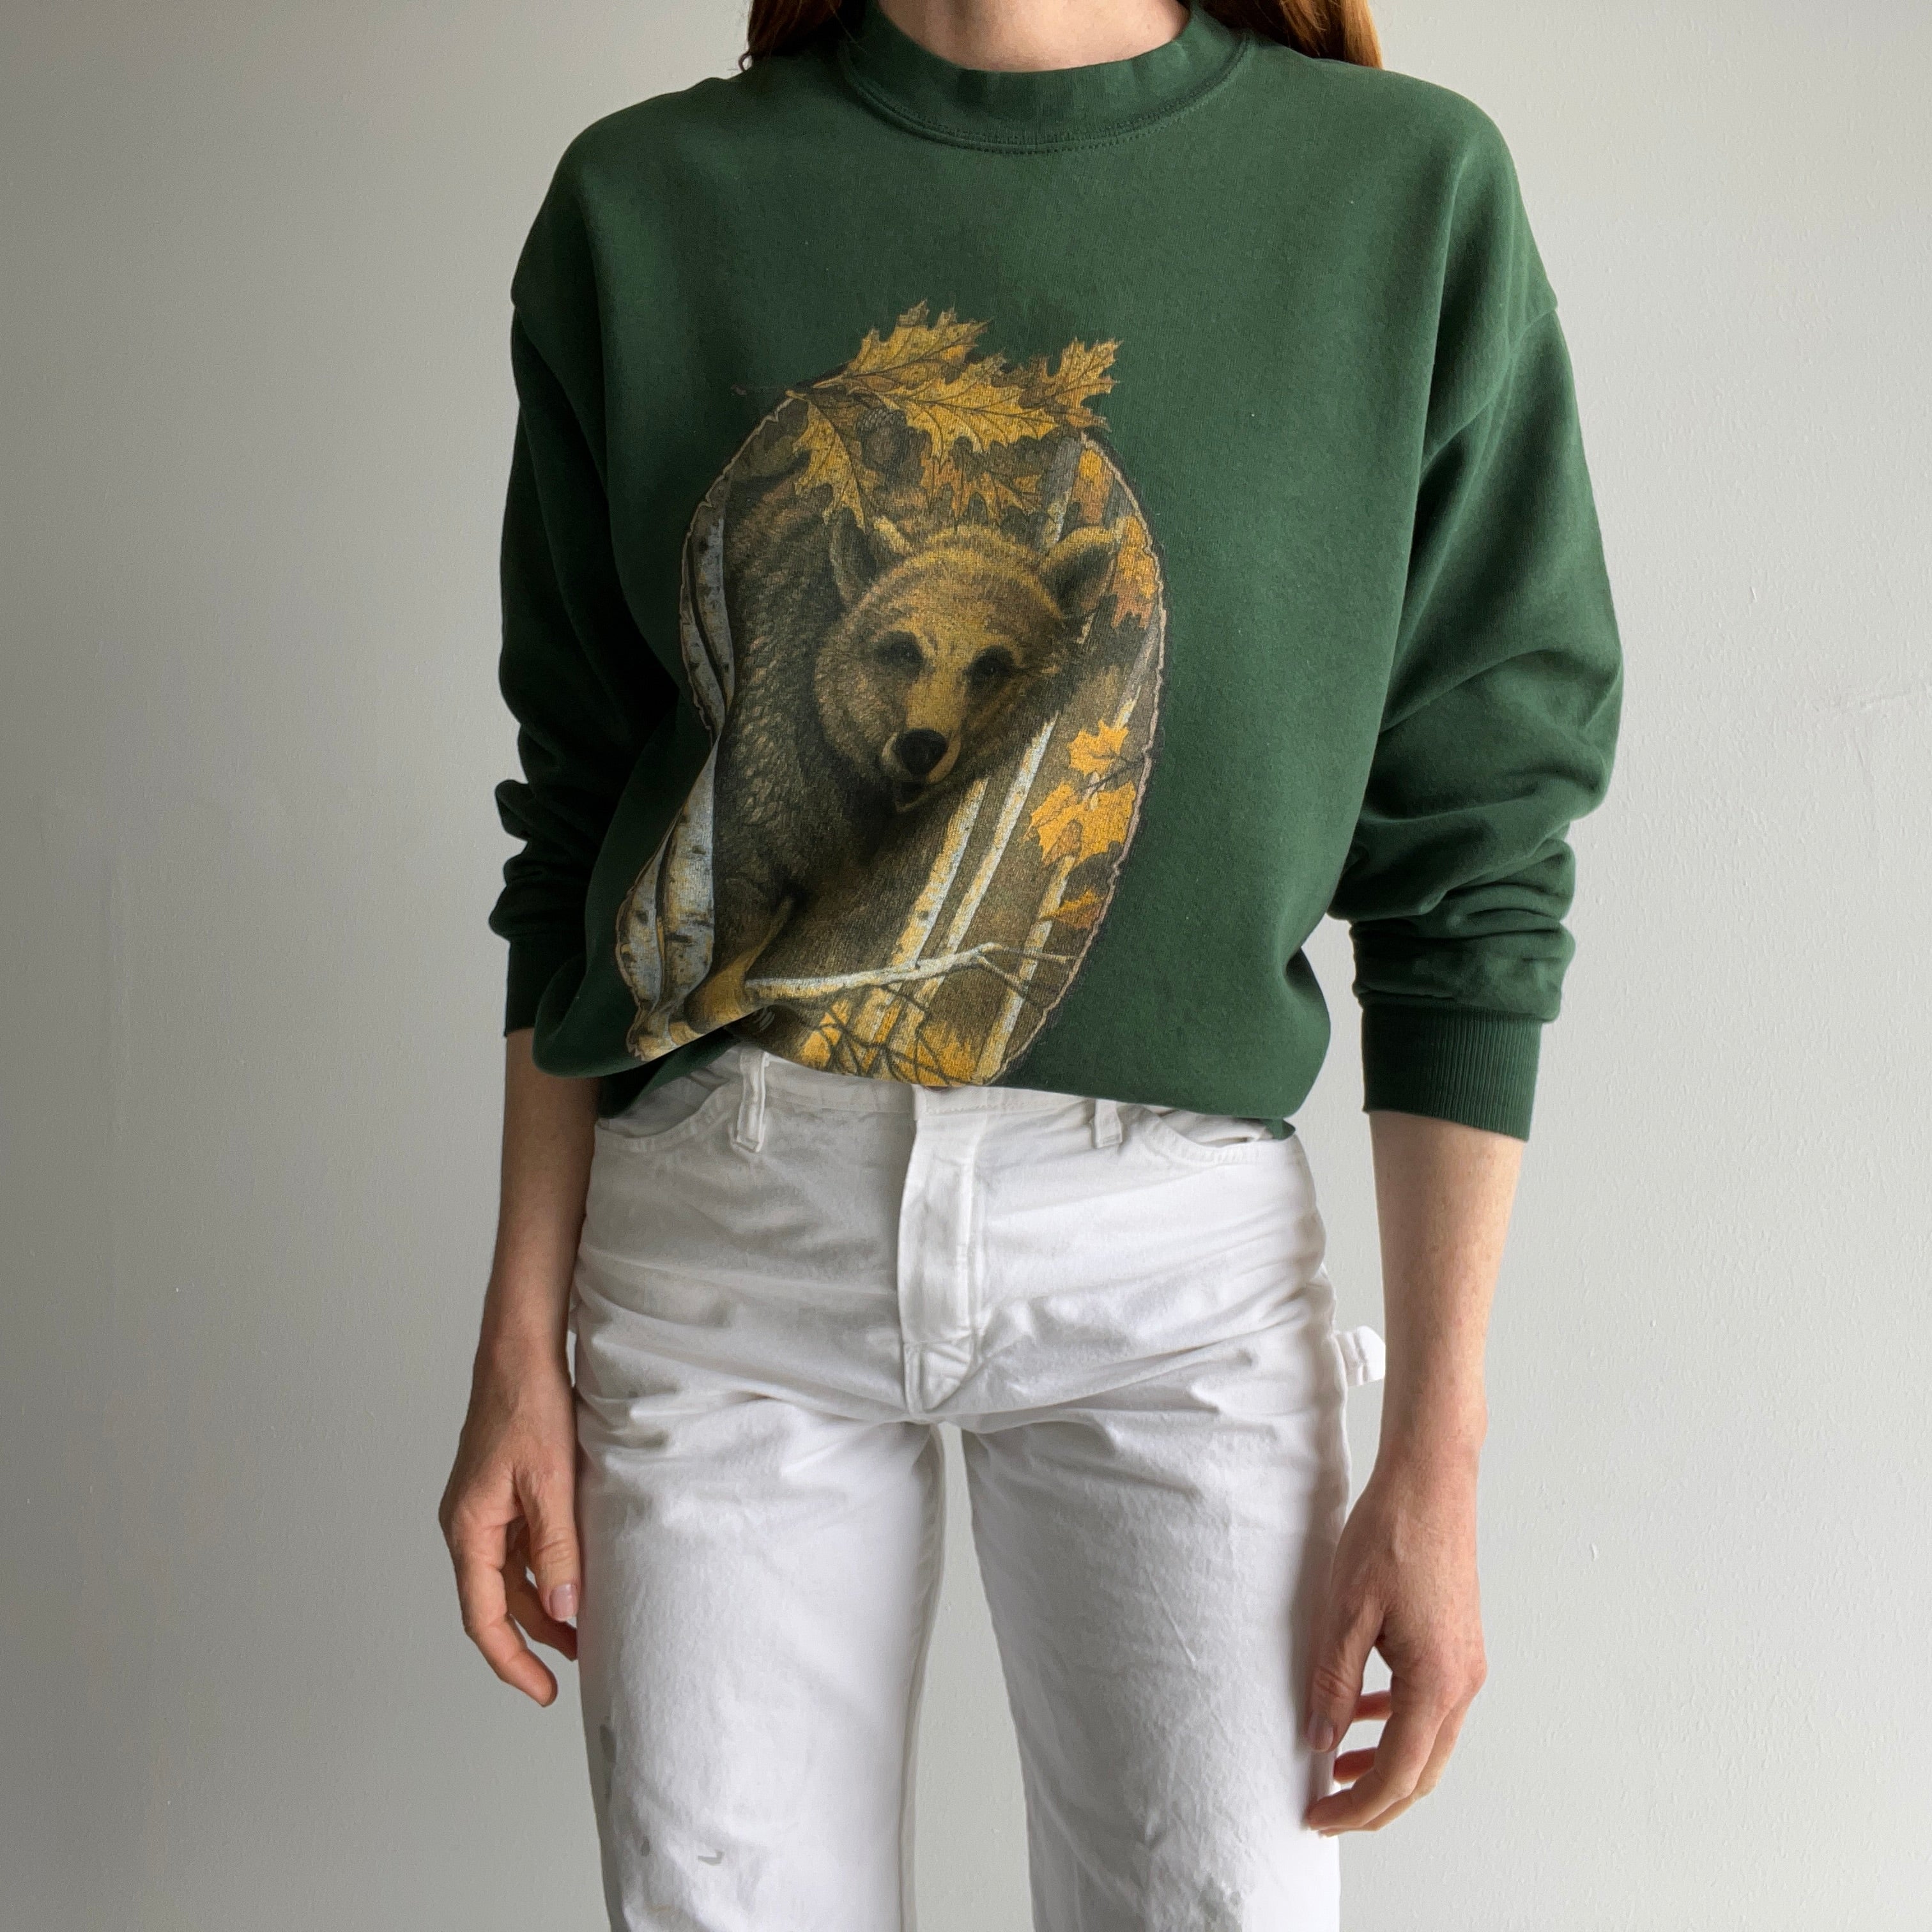 1980s Off Centered Bear Sweatshirt - REALLY WORN OUT